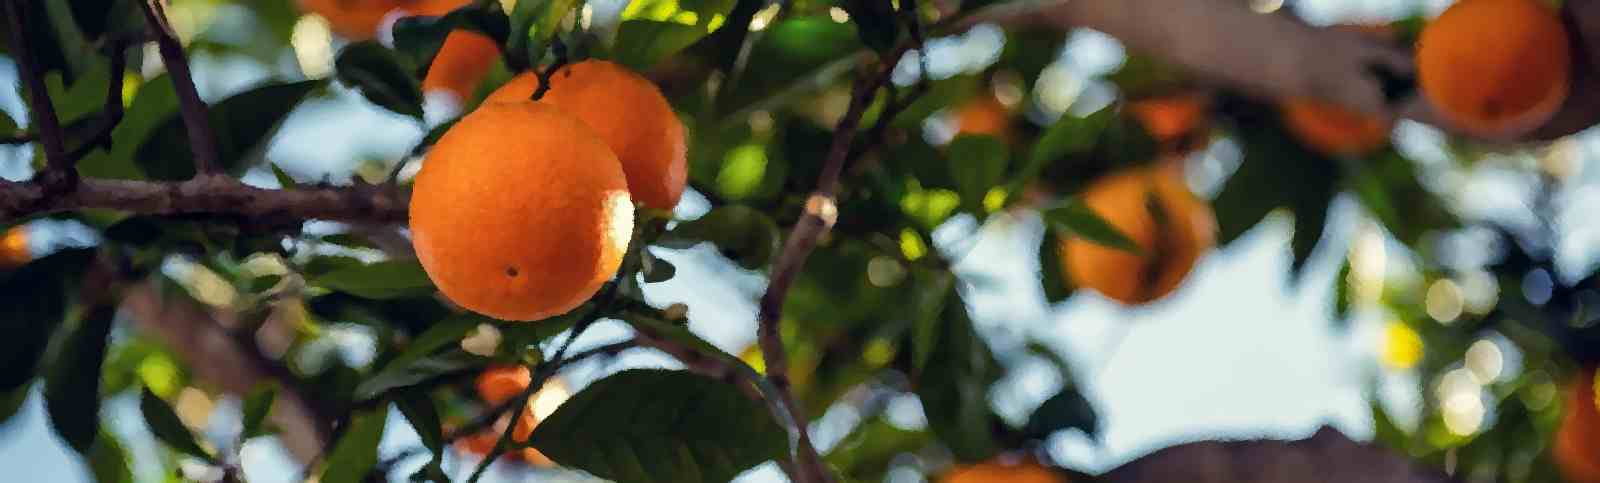 The Basics of Growing Peach and Nectarine Trees as Fan Trees